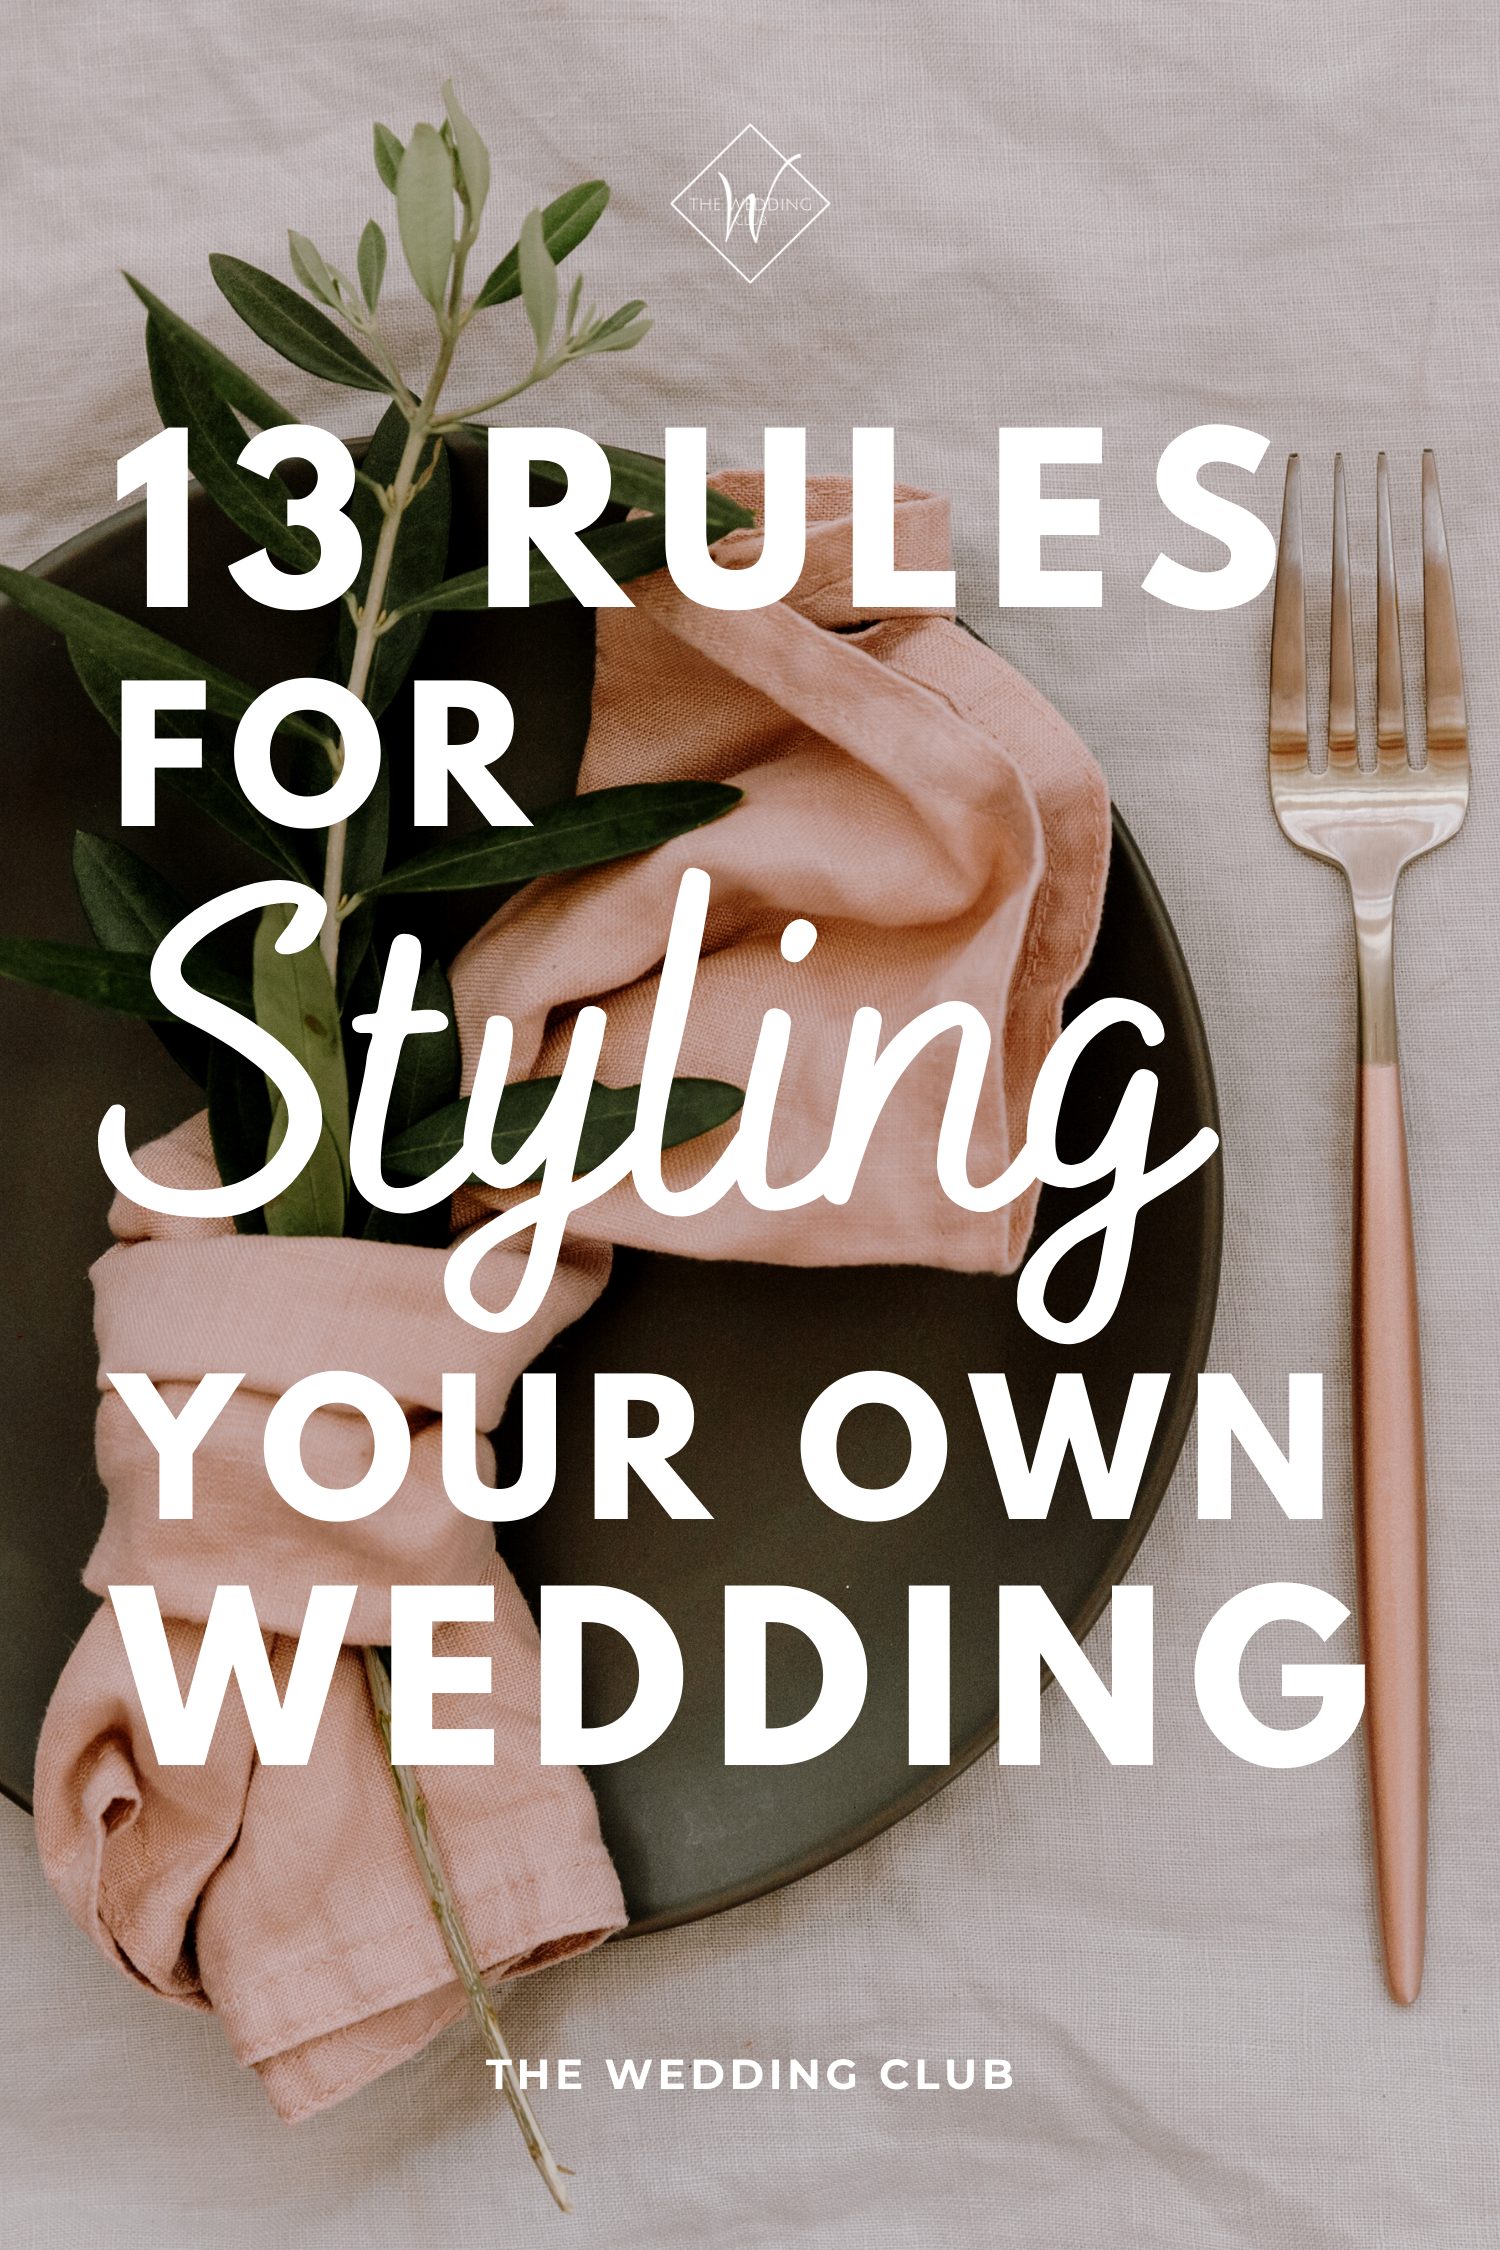 13 Rules for styling your own wedding - The Wedding Club